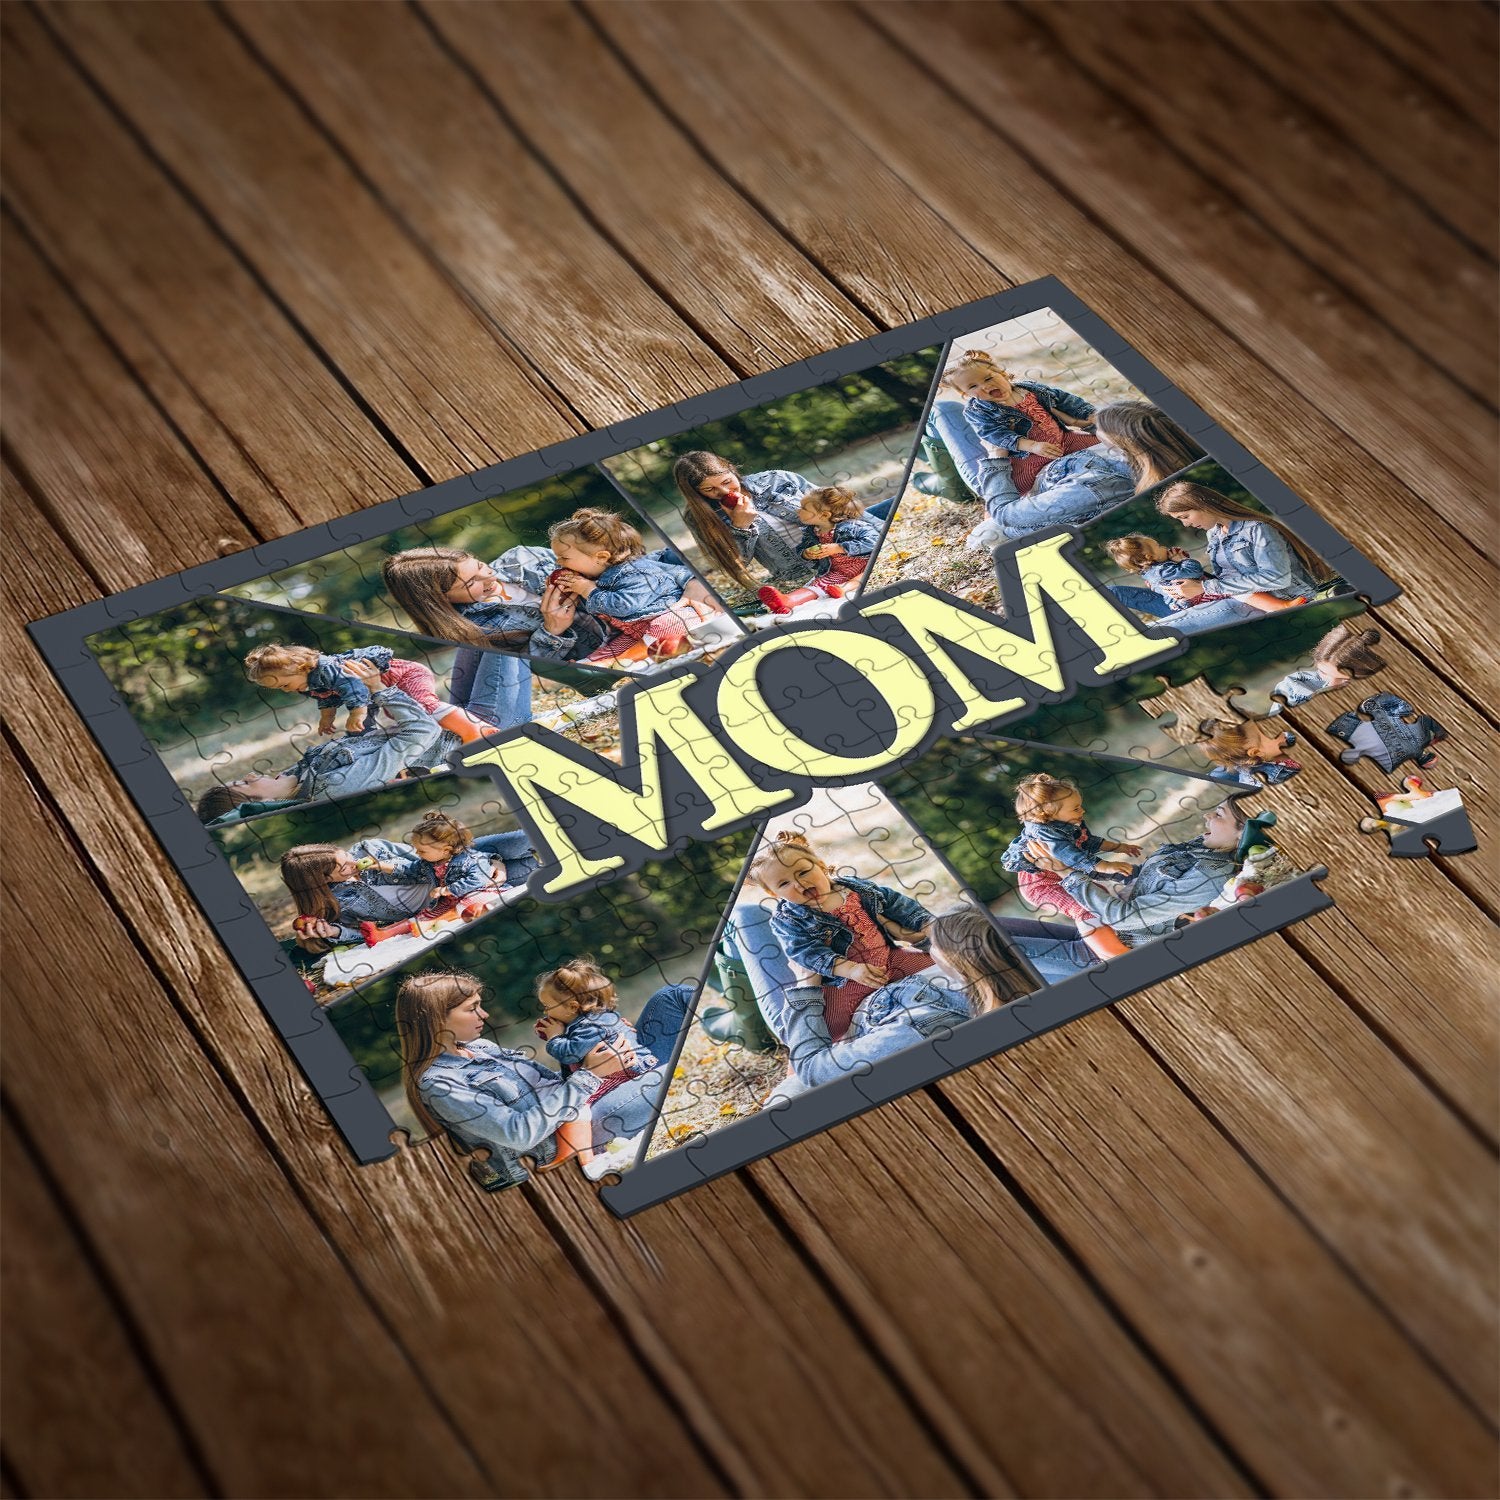 Mom Custom Photo Collage, 10 Pictures Jigsaw Puzzles